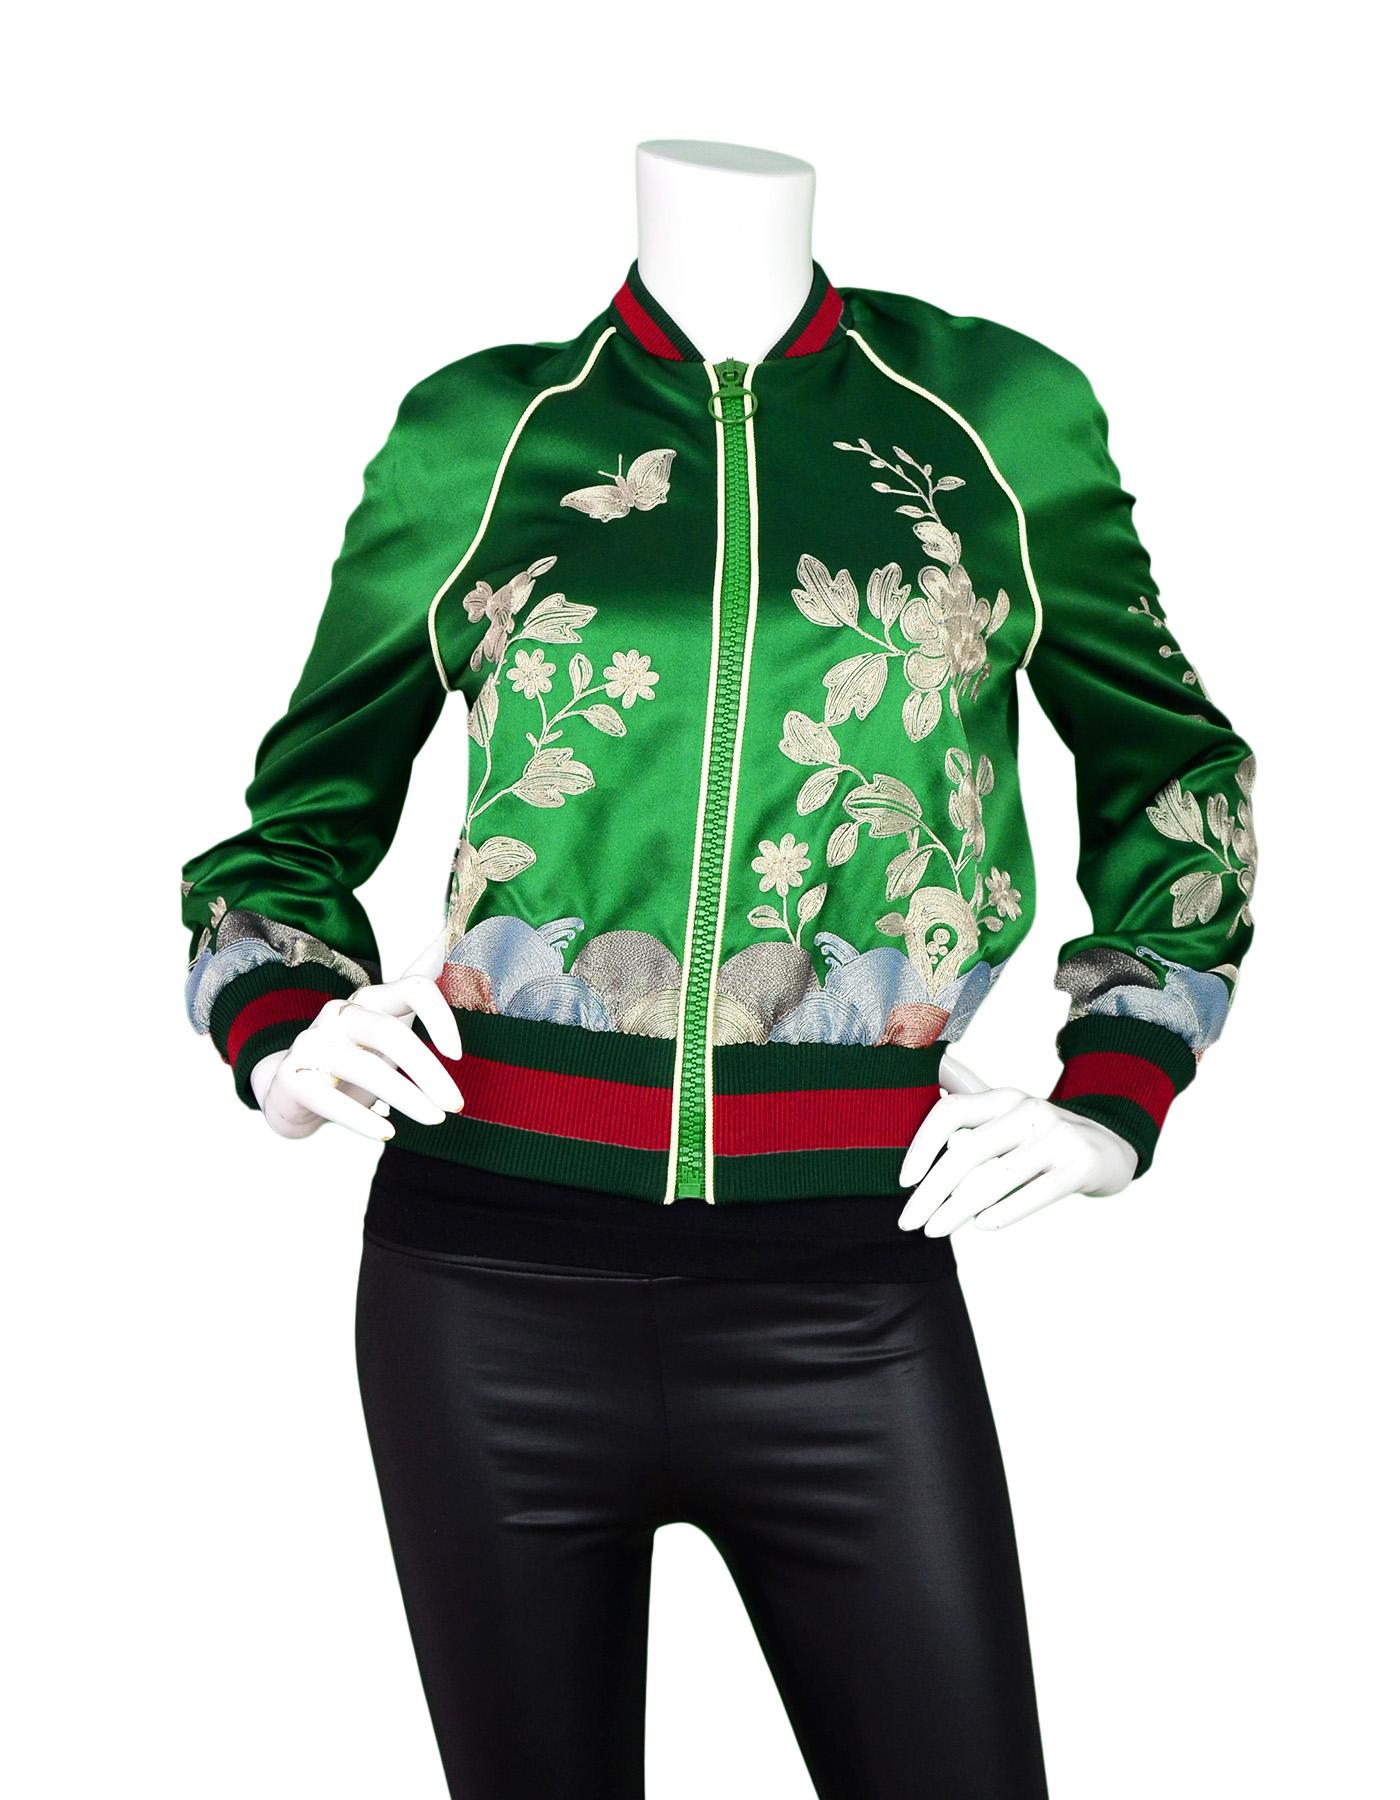 Gucci Spring 2016 Green Silk Duchesse Bomber Jacket sz 40. Features metallic embroidered floral pattern and green and red web collar and cuffs

Made In: Italy
Color: Green, metallic, red
Exterior Composition: 100% silk 
Closure/Opening: Front zip